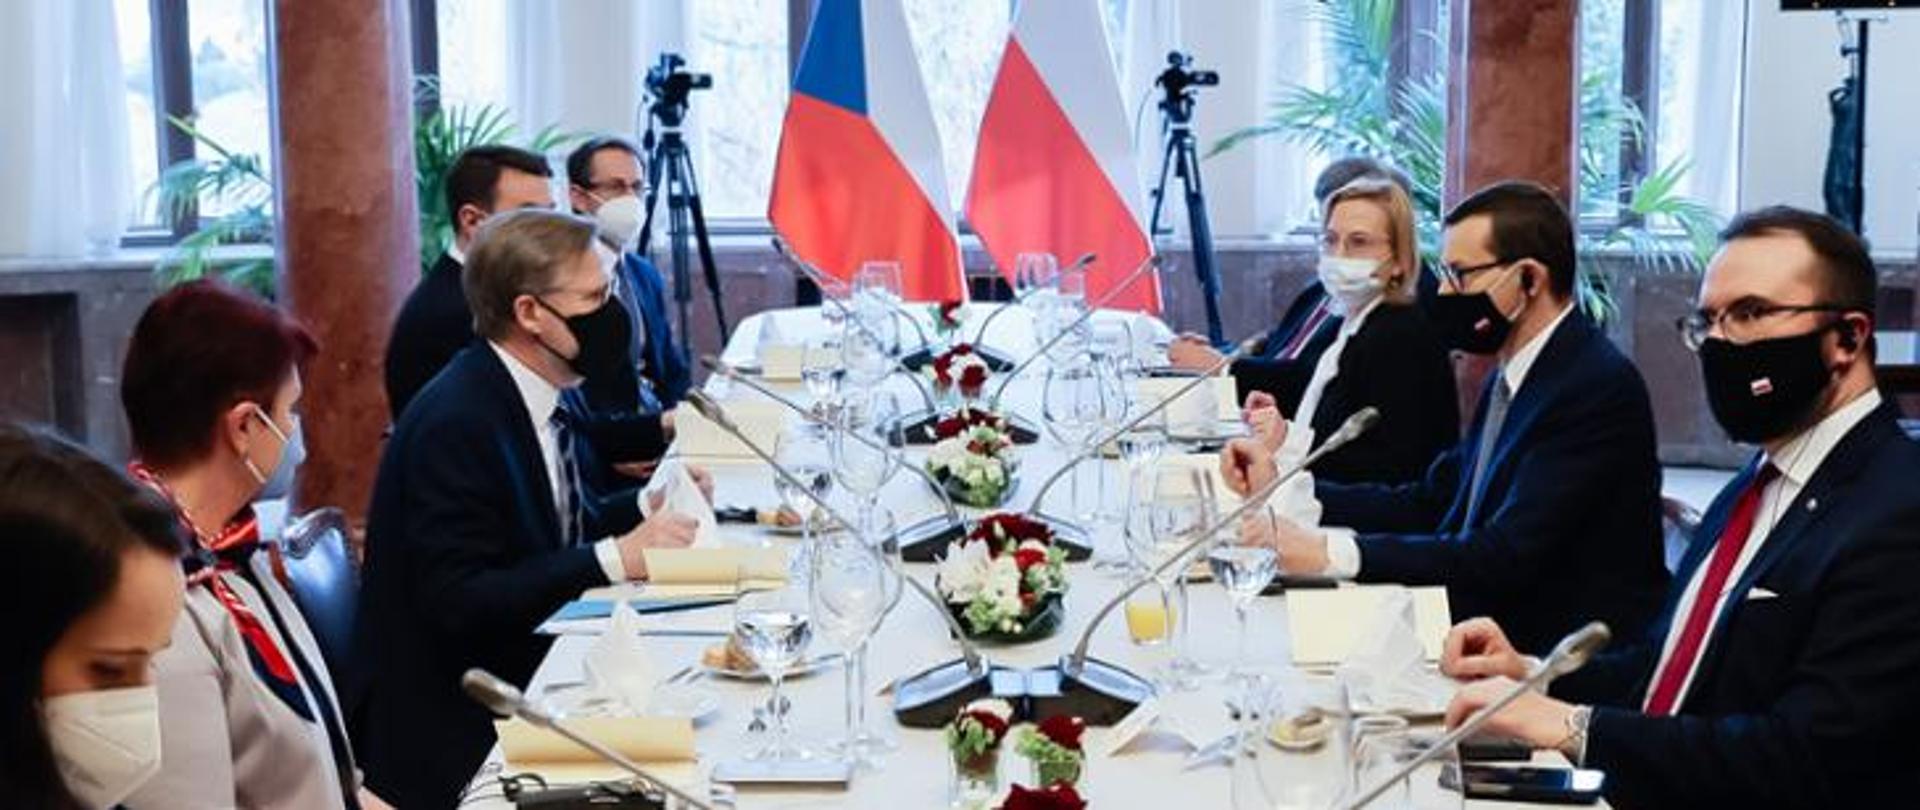 Prime Minister Mateusz Morawiecki, accompanied by the Minister of Climate and Environment, Anna Moskwa meeting the Czech Prime Minister, Petr Fiala.